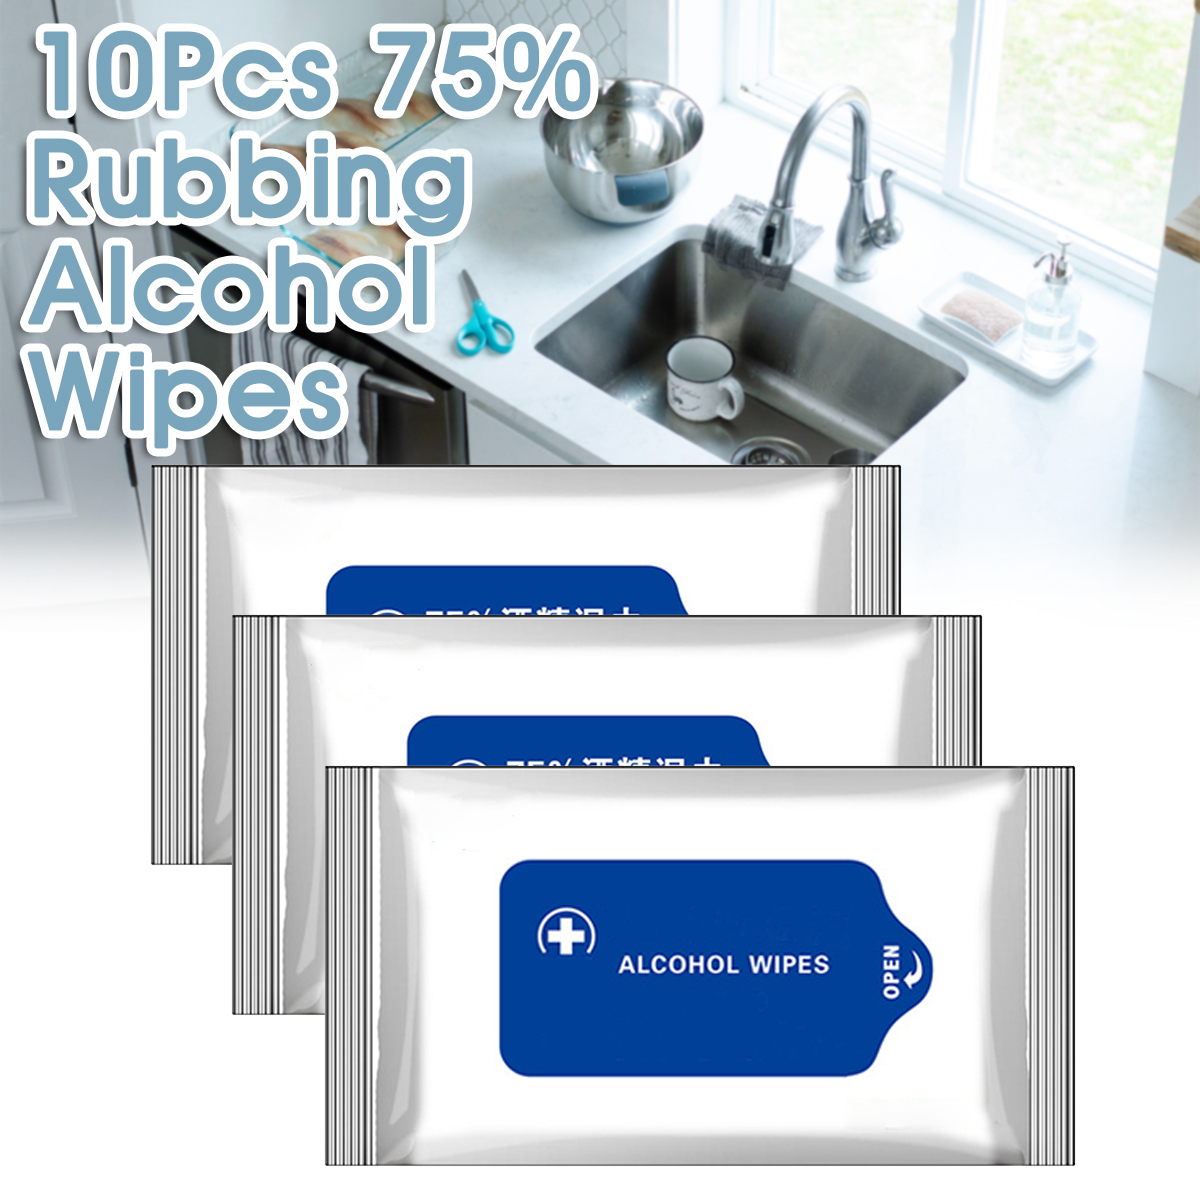 10Pcs-75-Rubbing-Alcohol-Wipes-Outdoor-Portable-Disposable-Skin-Sterilization-Pads-Cleaning-Wet-Wipe-1668570-1